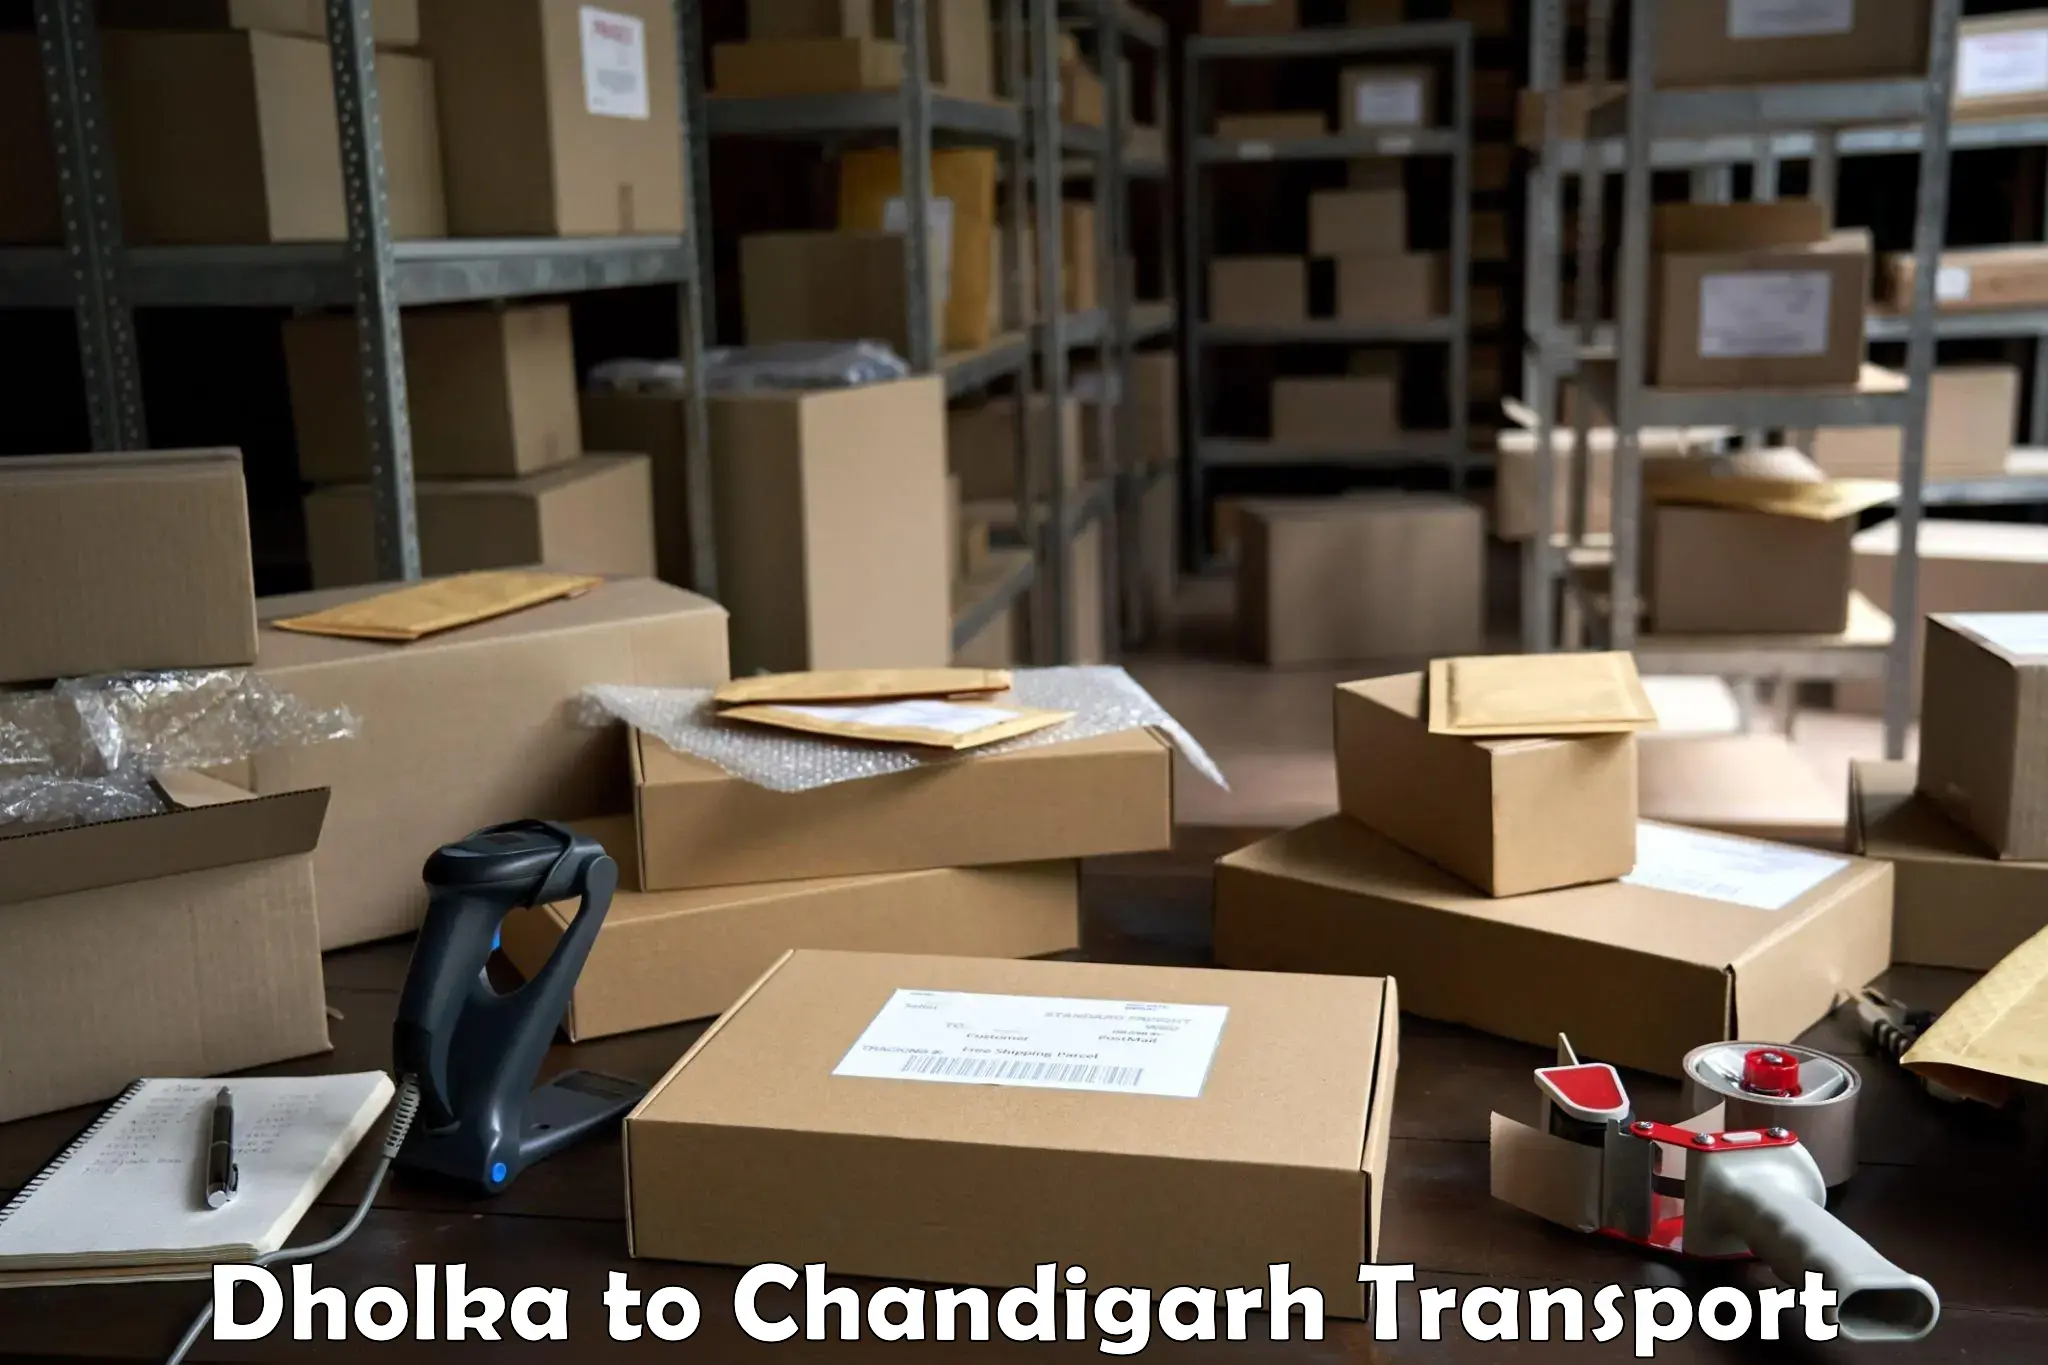 Two wheeler parcel service Dholka to Chandigarh